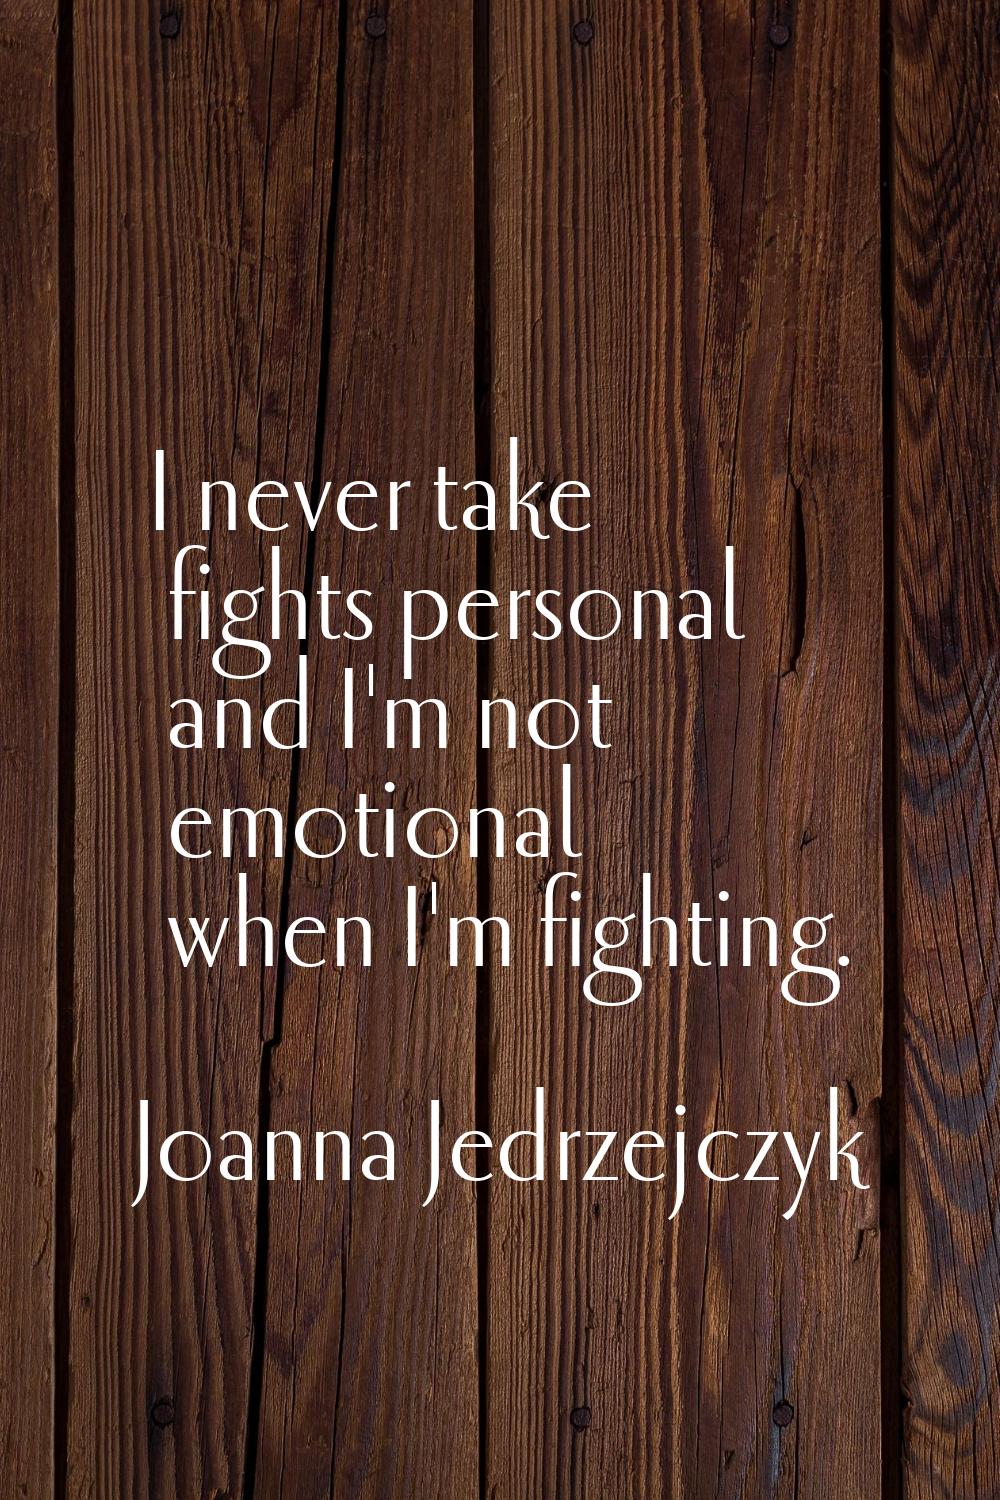 I never take fights personal and I'm not emotional when I'm fighting.